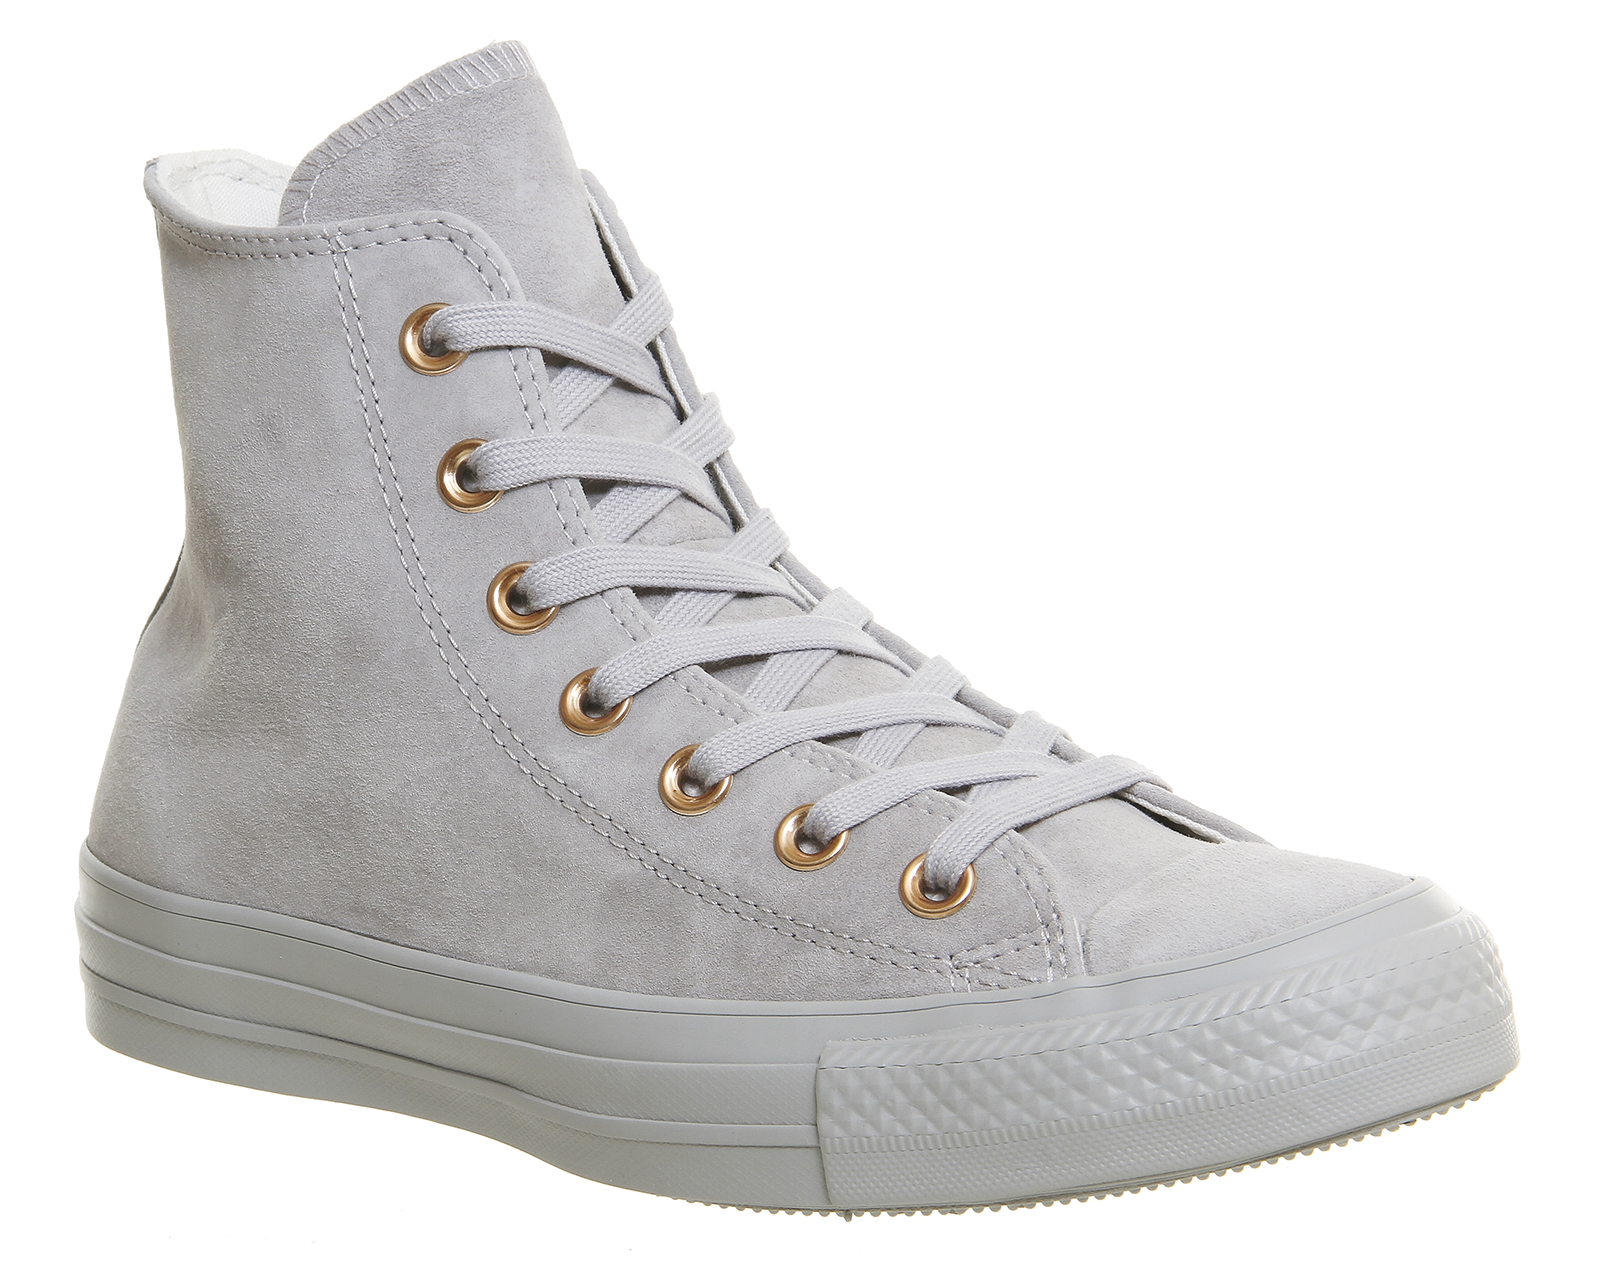 converse all star hi leather suede sneaker unisex adulto